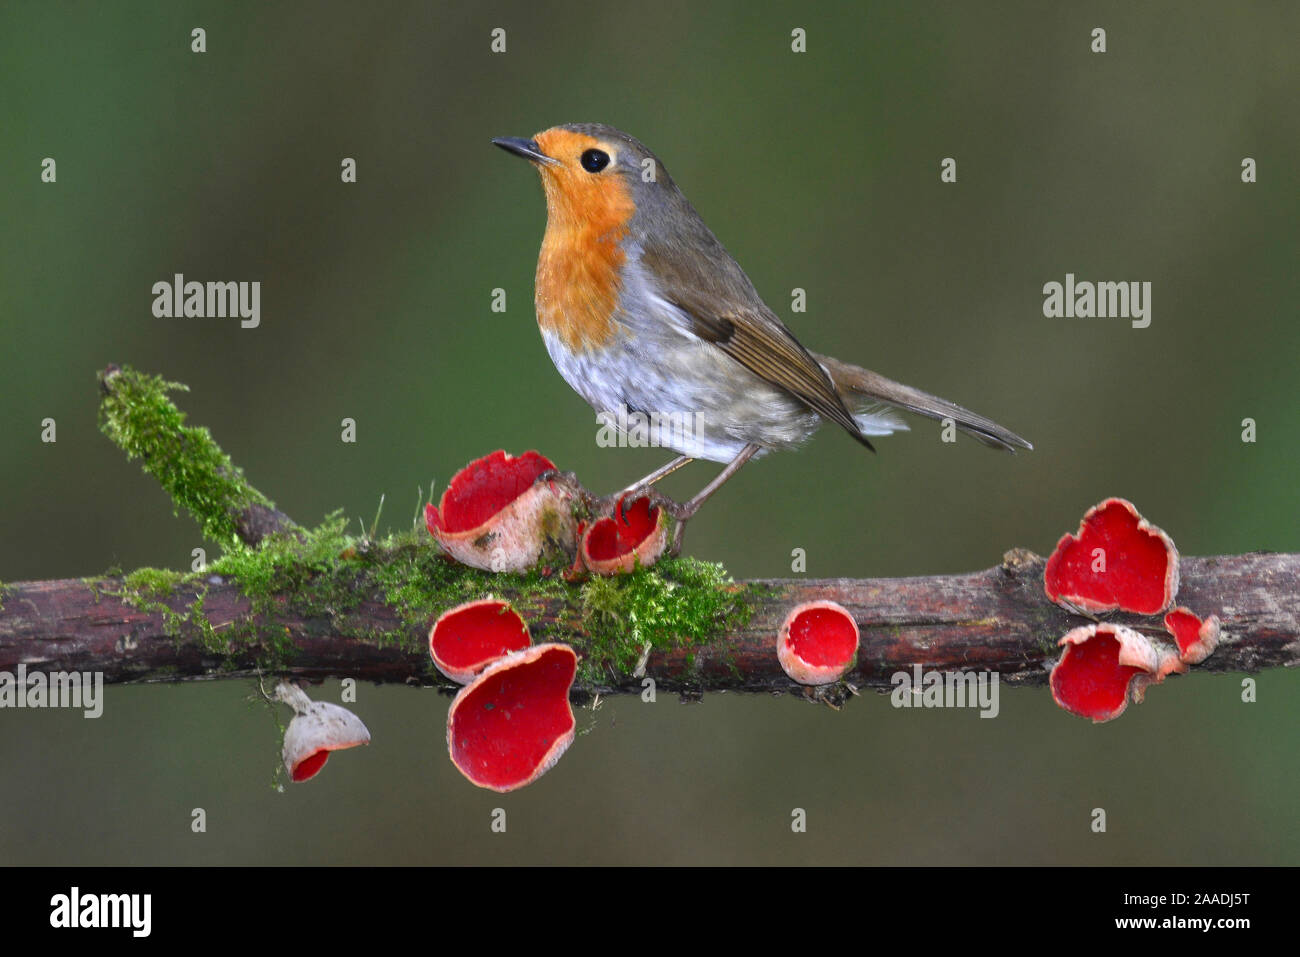 Robin (Erithacus rubecula) on branch with Scarlet elfcup fungus (Sarcoscypha coccinea) spring. Dorset, UK, March. Stock Photo